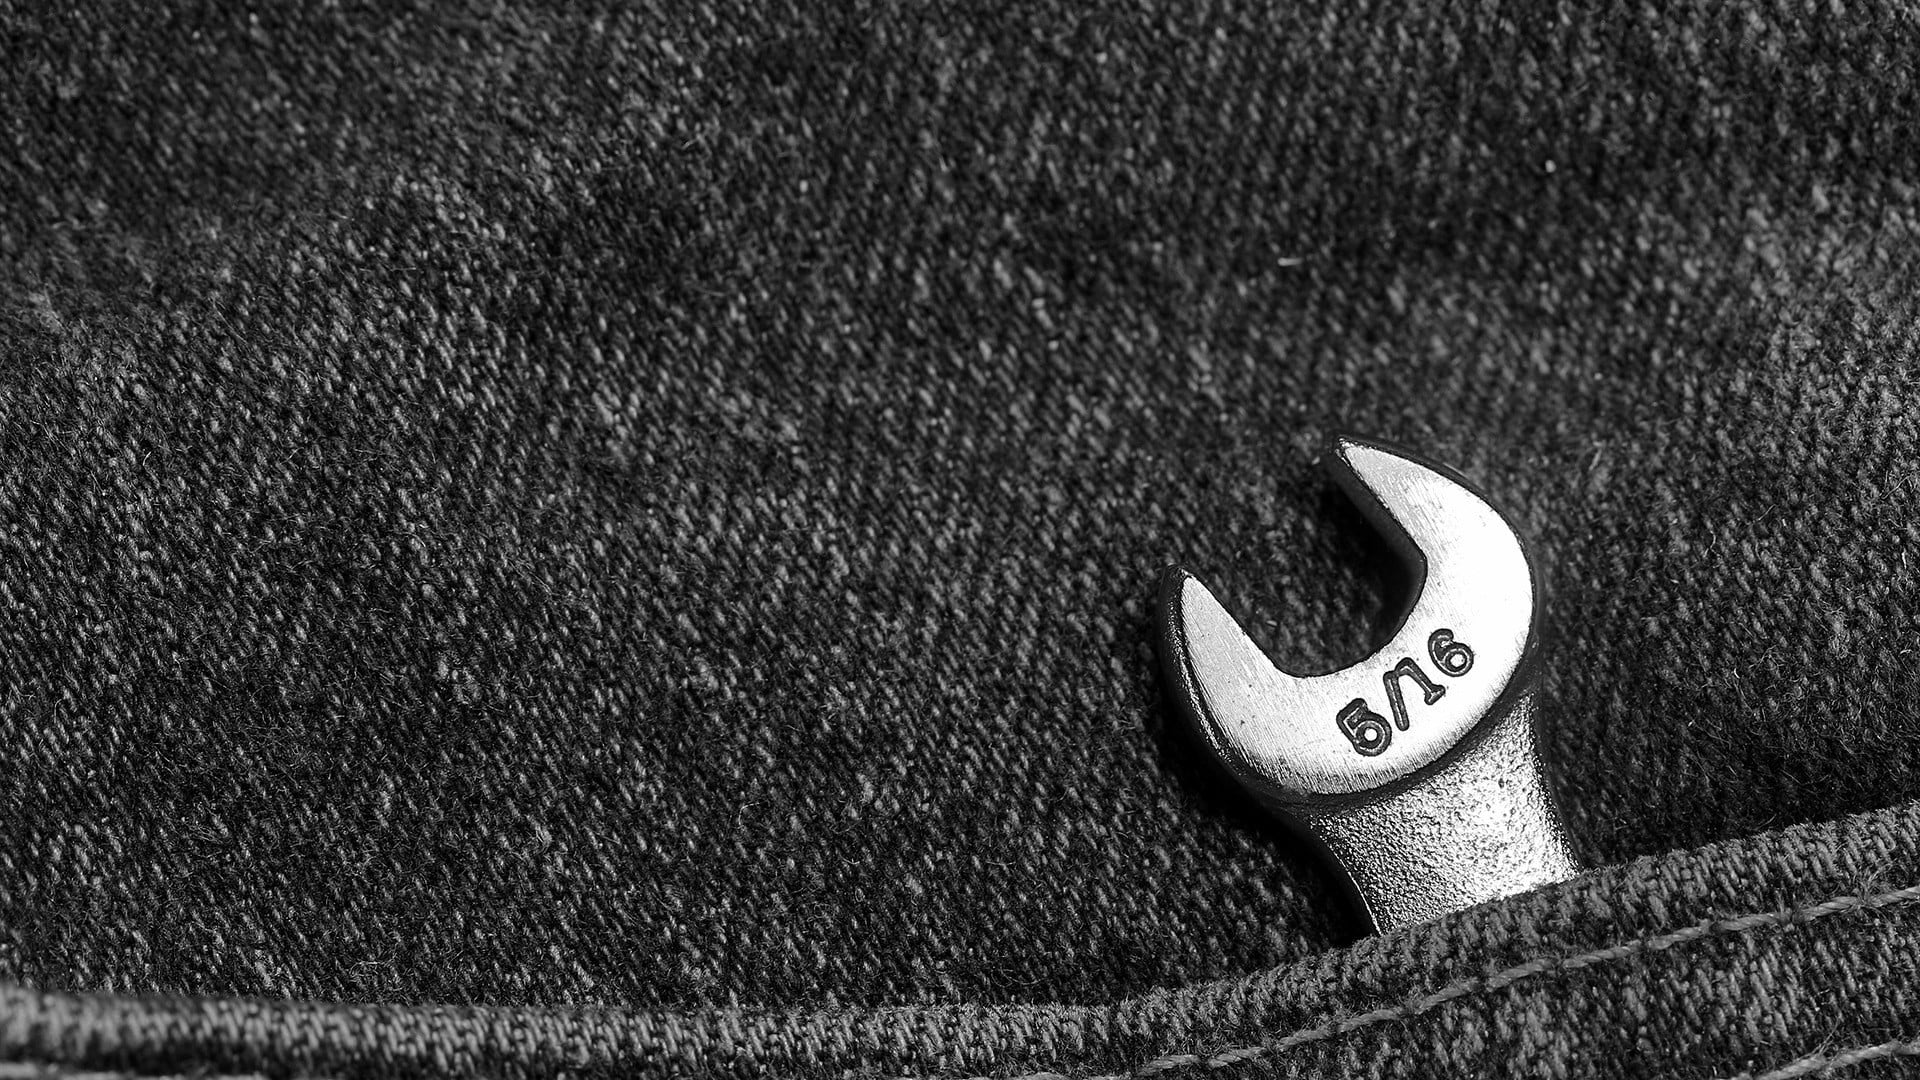 5/16 silver open wrench, monochrome, jeans, pocket, tools, metal